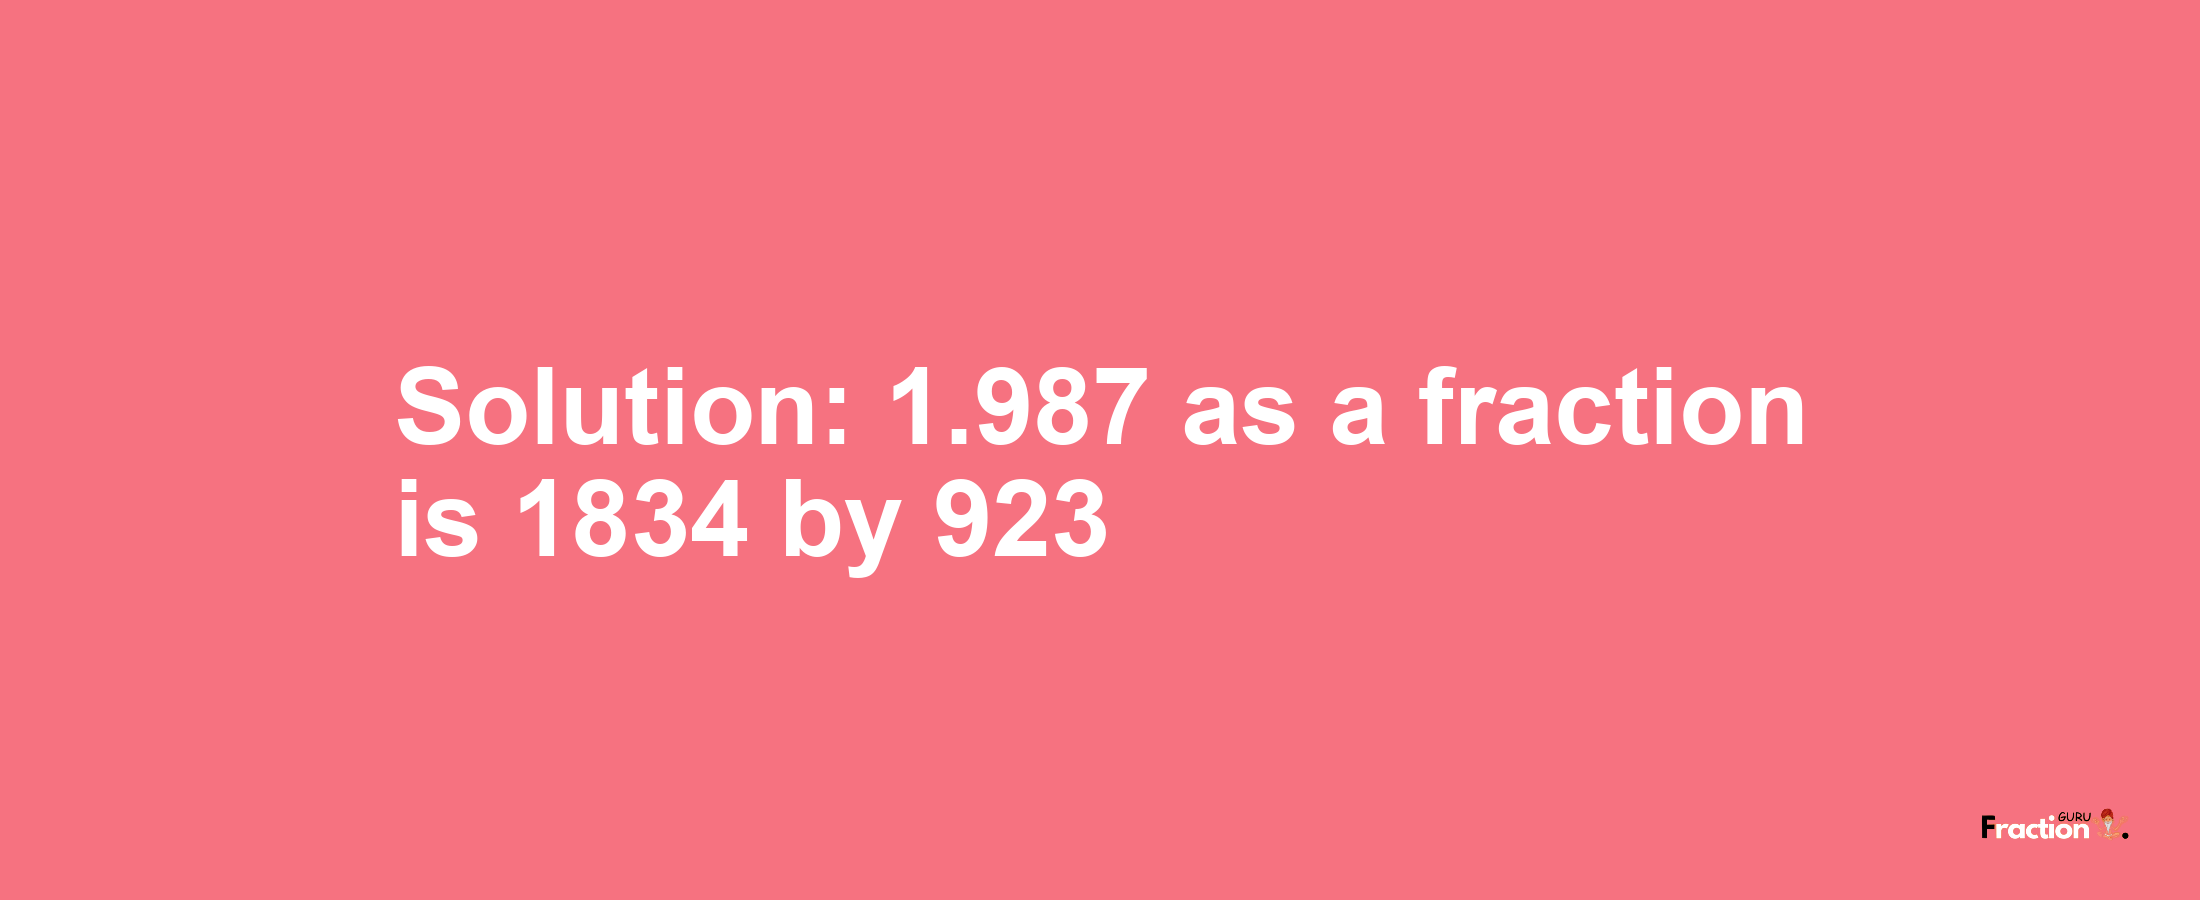 Solution:1.987 as a fraction is 1834/923